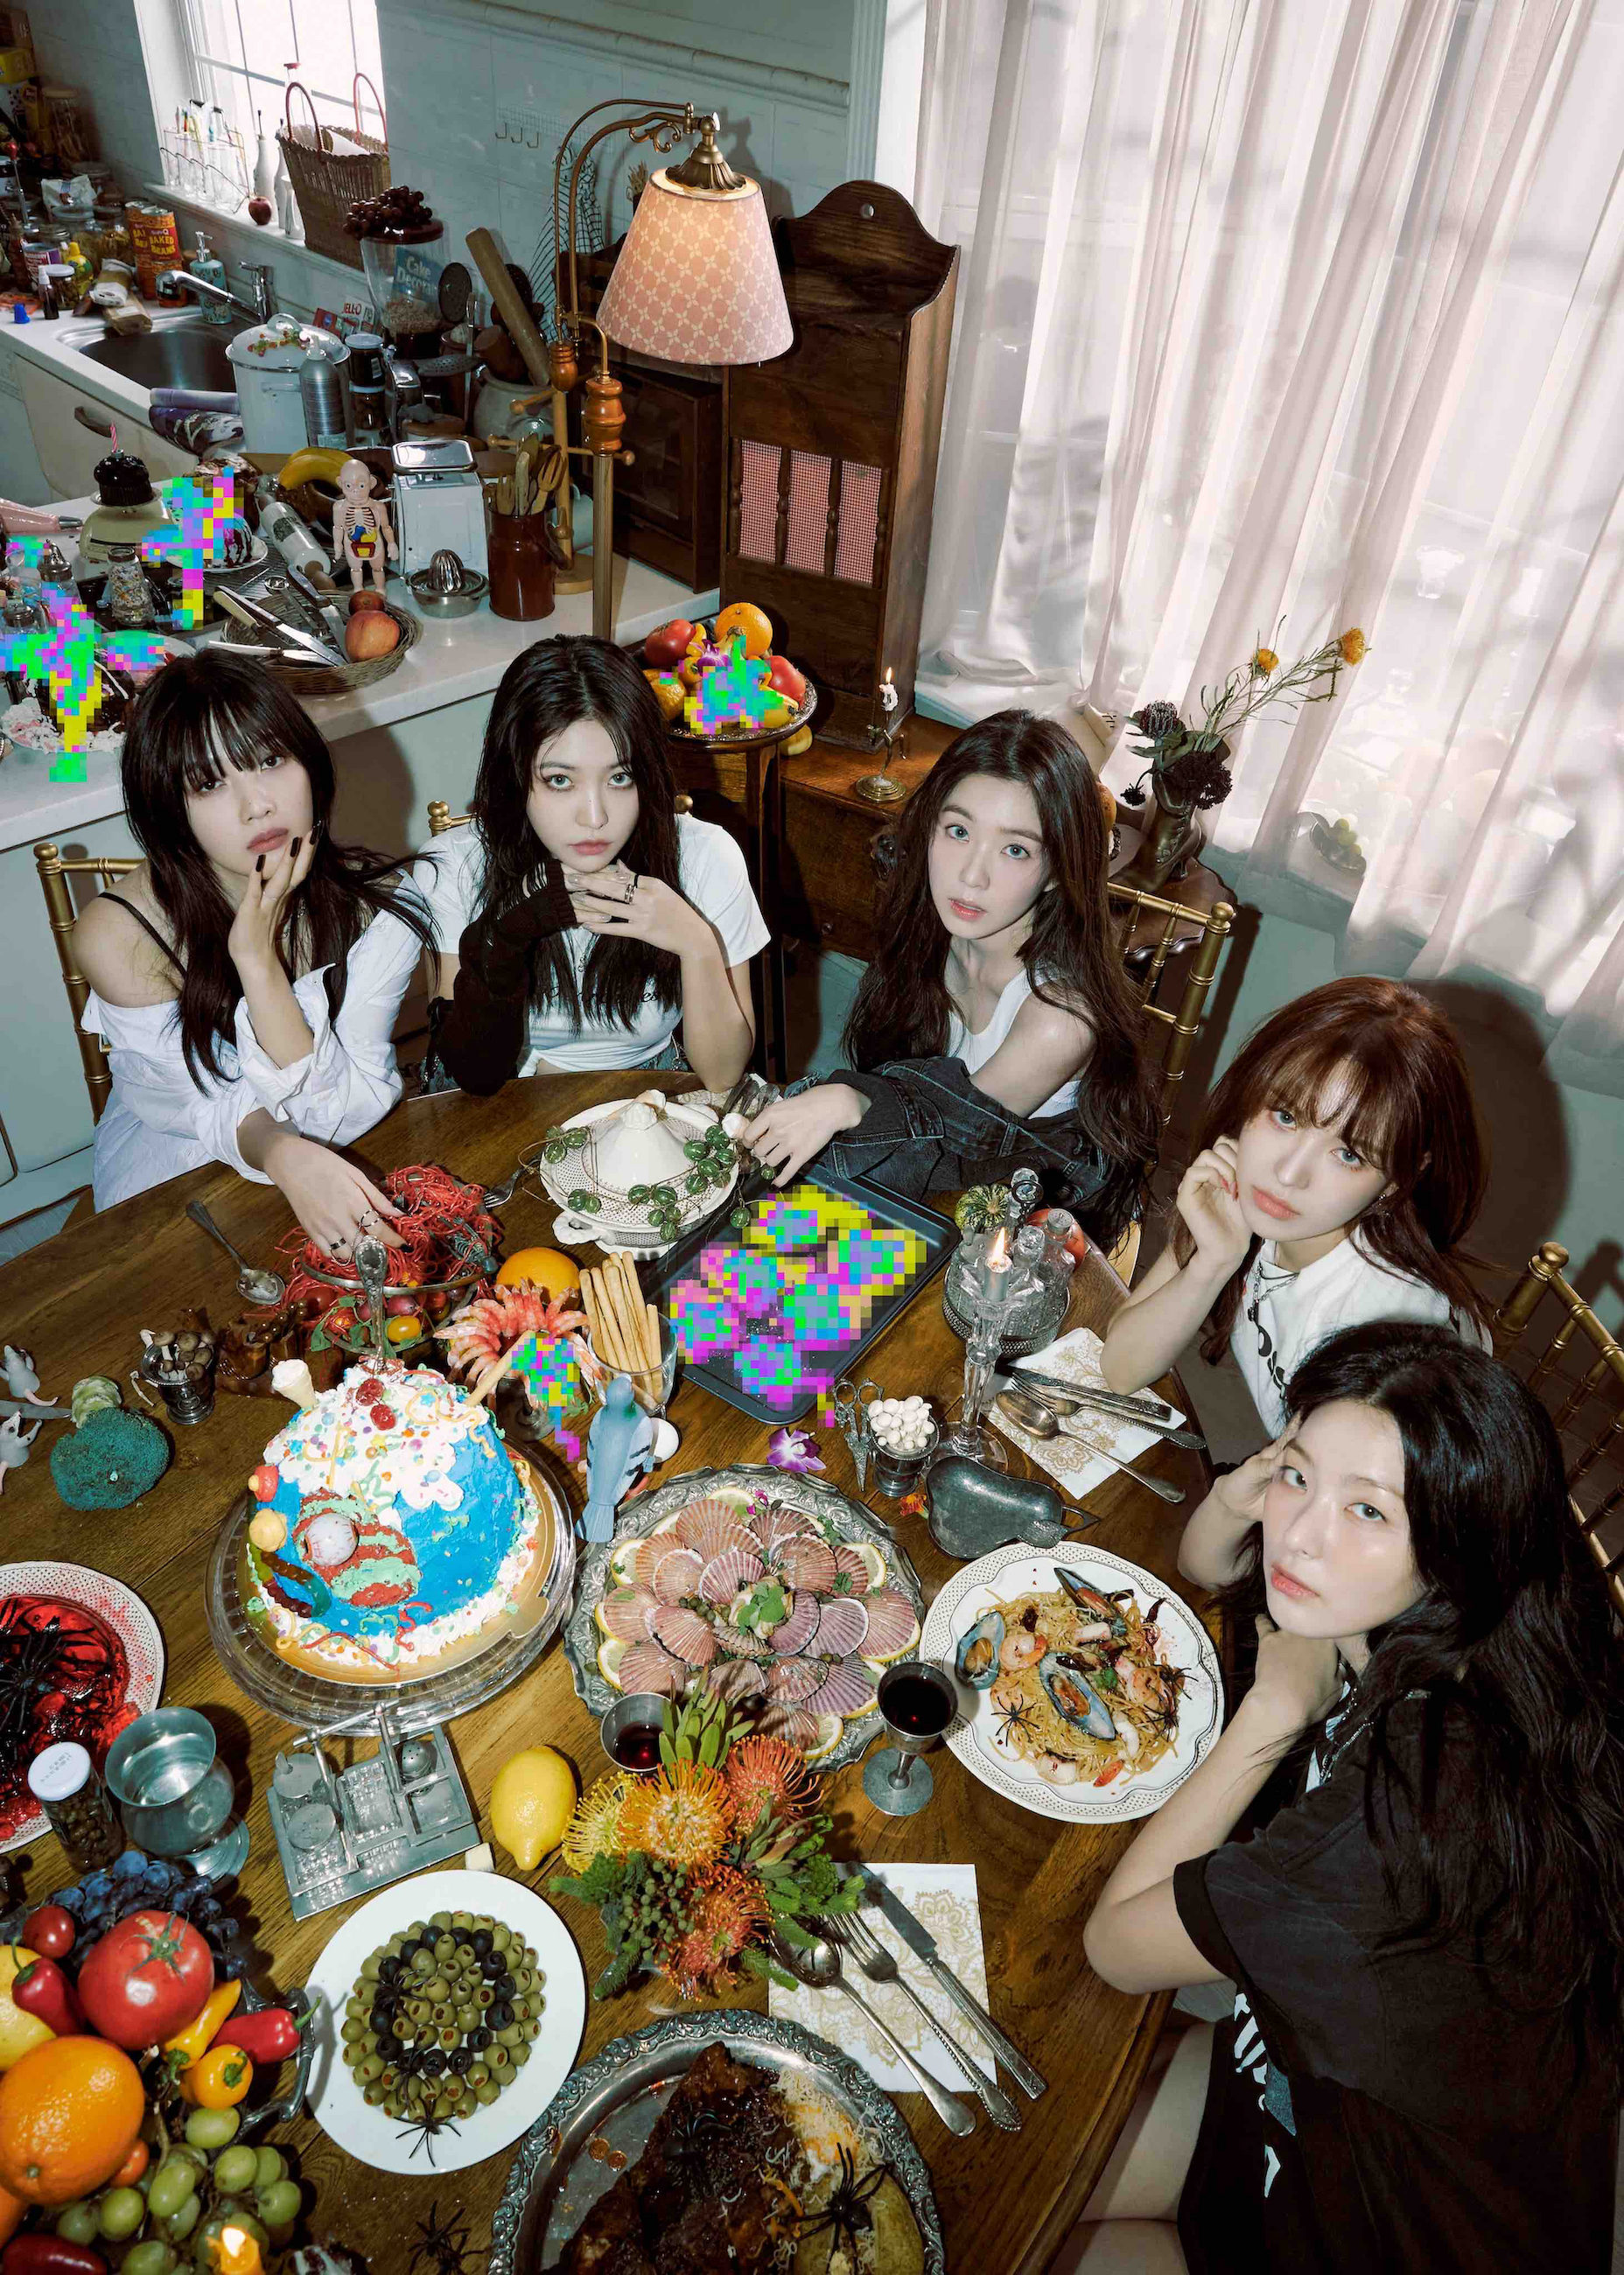 Red Velvet Continues Teasing “Russian Roulette” Comeback